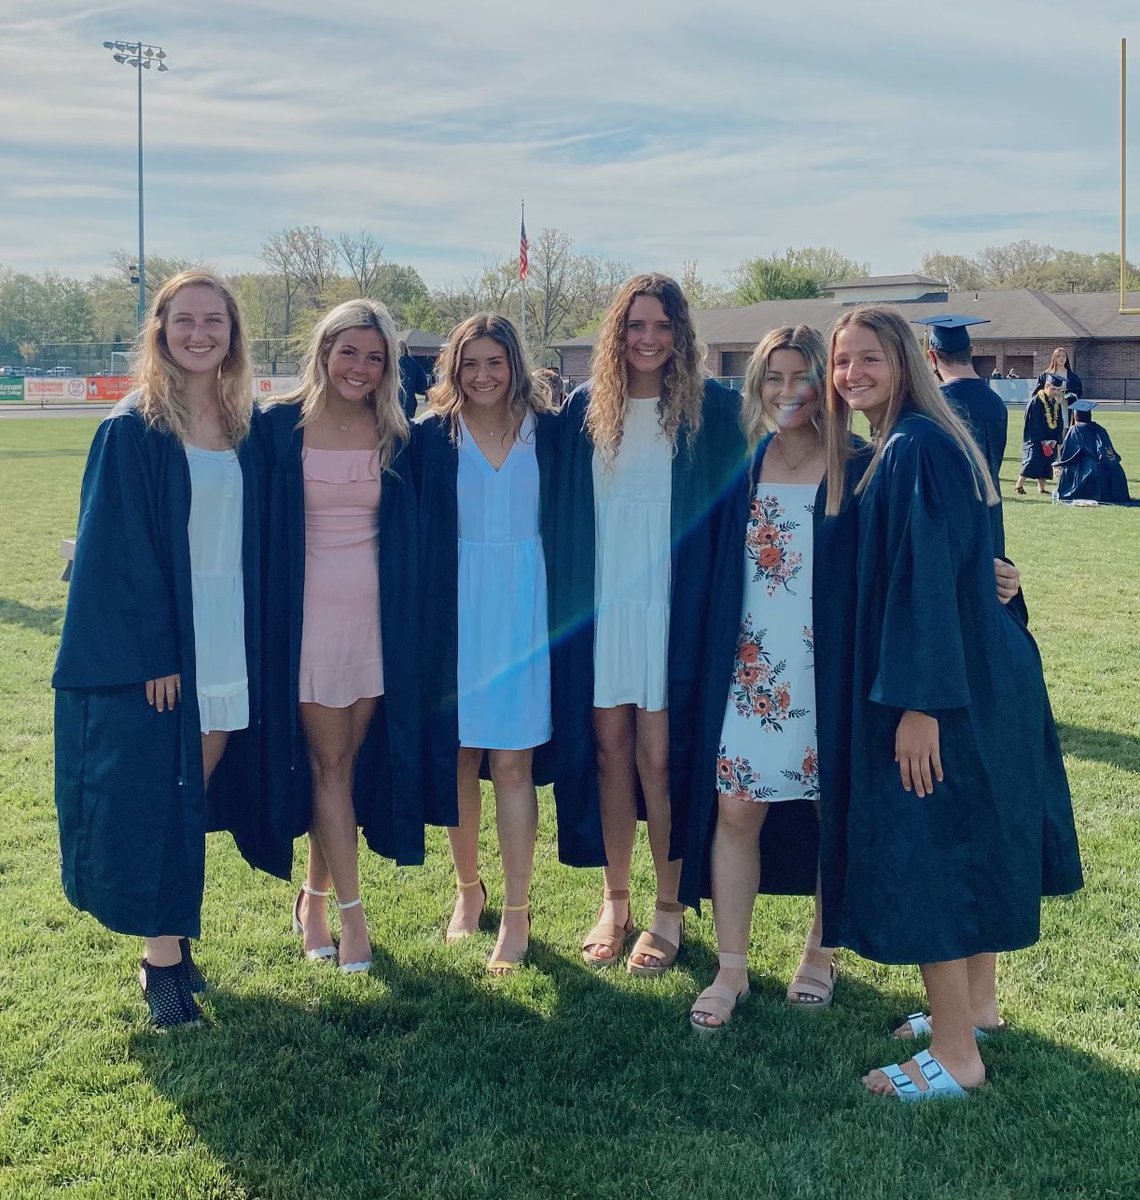 Our 6 seniors celebrated their last ever day of high school! We are so blessed to be led by such inspiring and resilient young women. Hartland High School will miss you all so much. Time to finish the year strong!